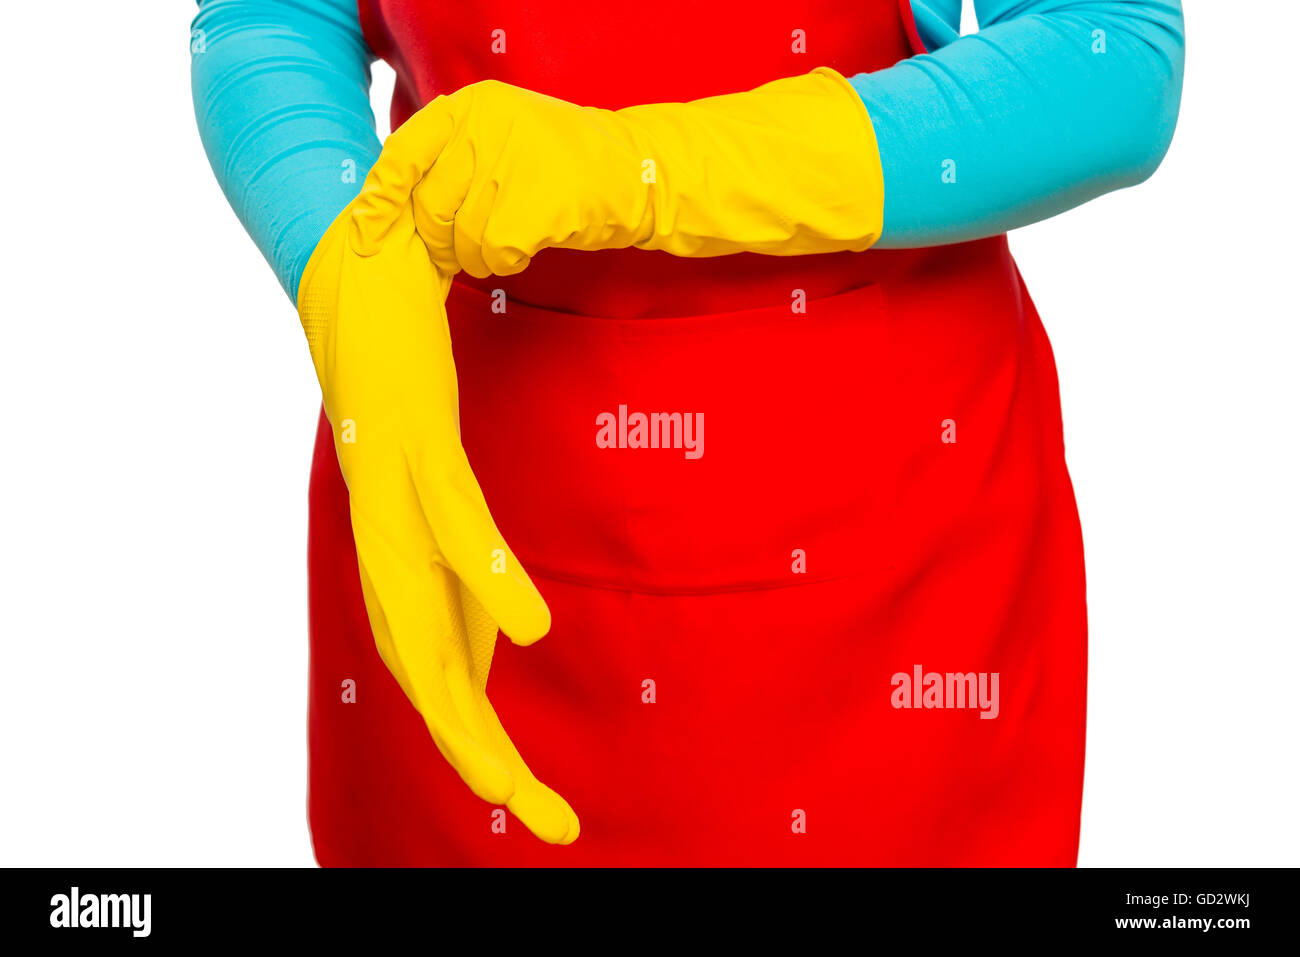 housewife putting on rubber gloves, close-up shot Stock Photo